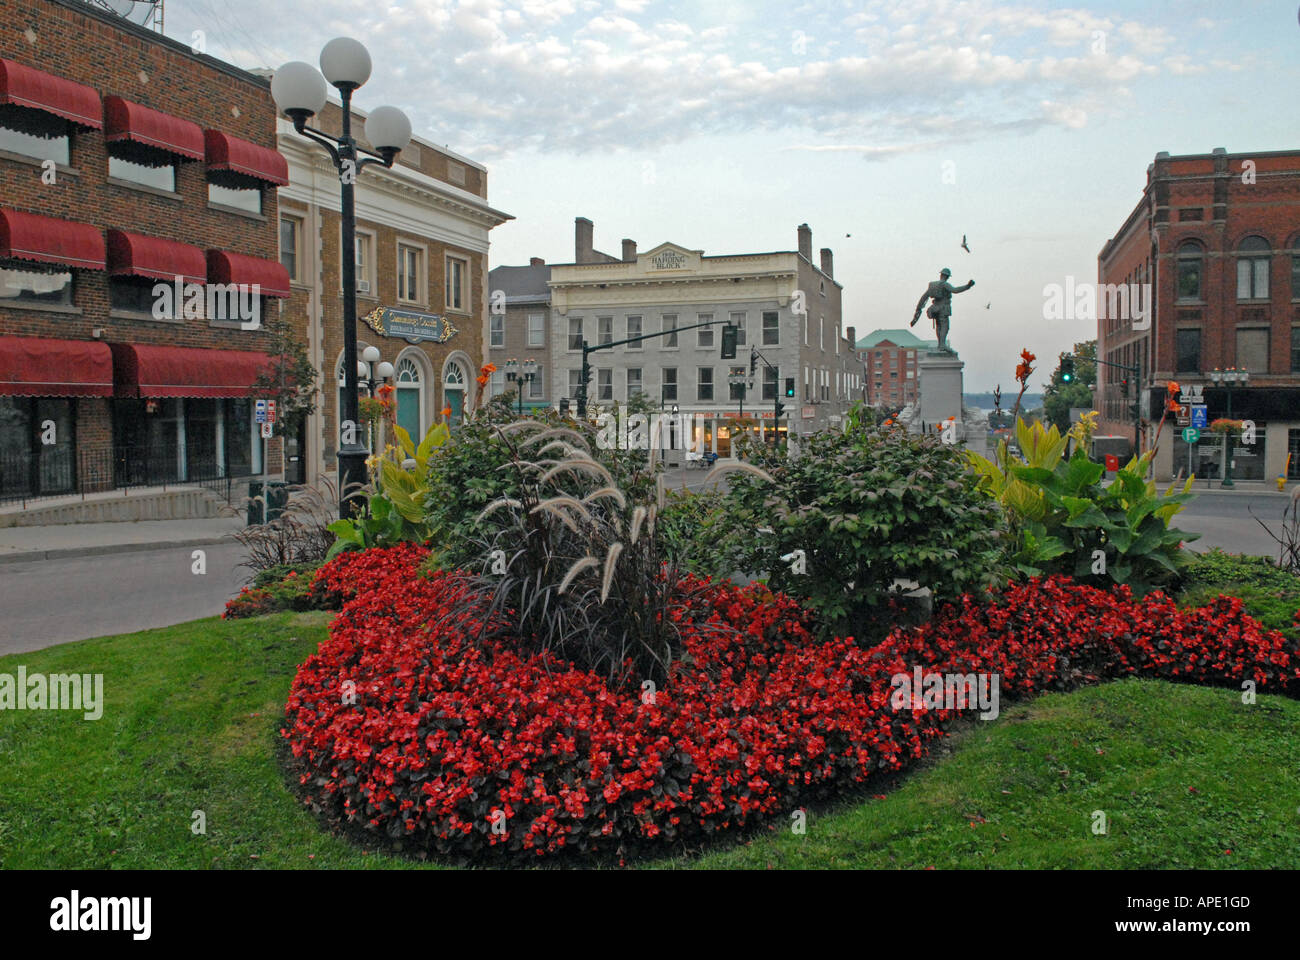 Main square in the Town of Brockville 1000 Islands region Province of Ontario Canada Stock Photo